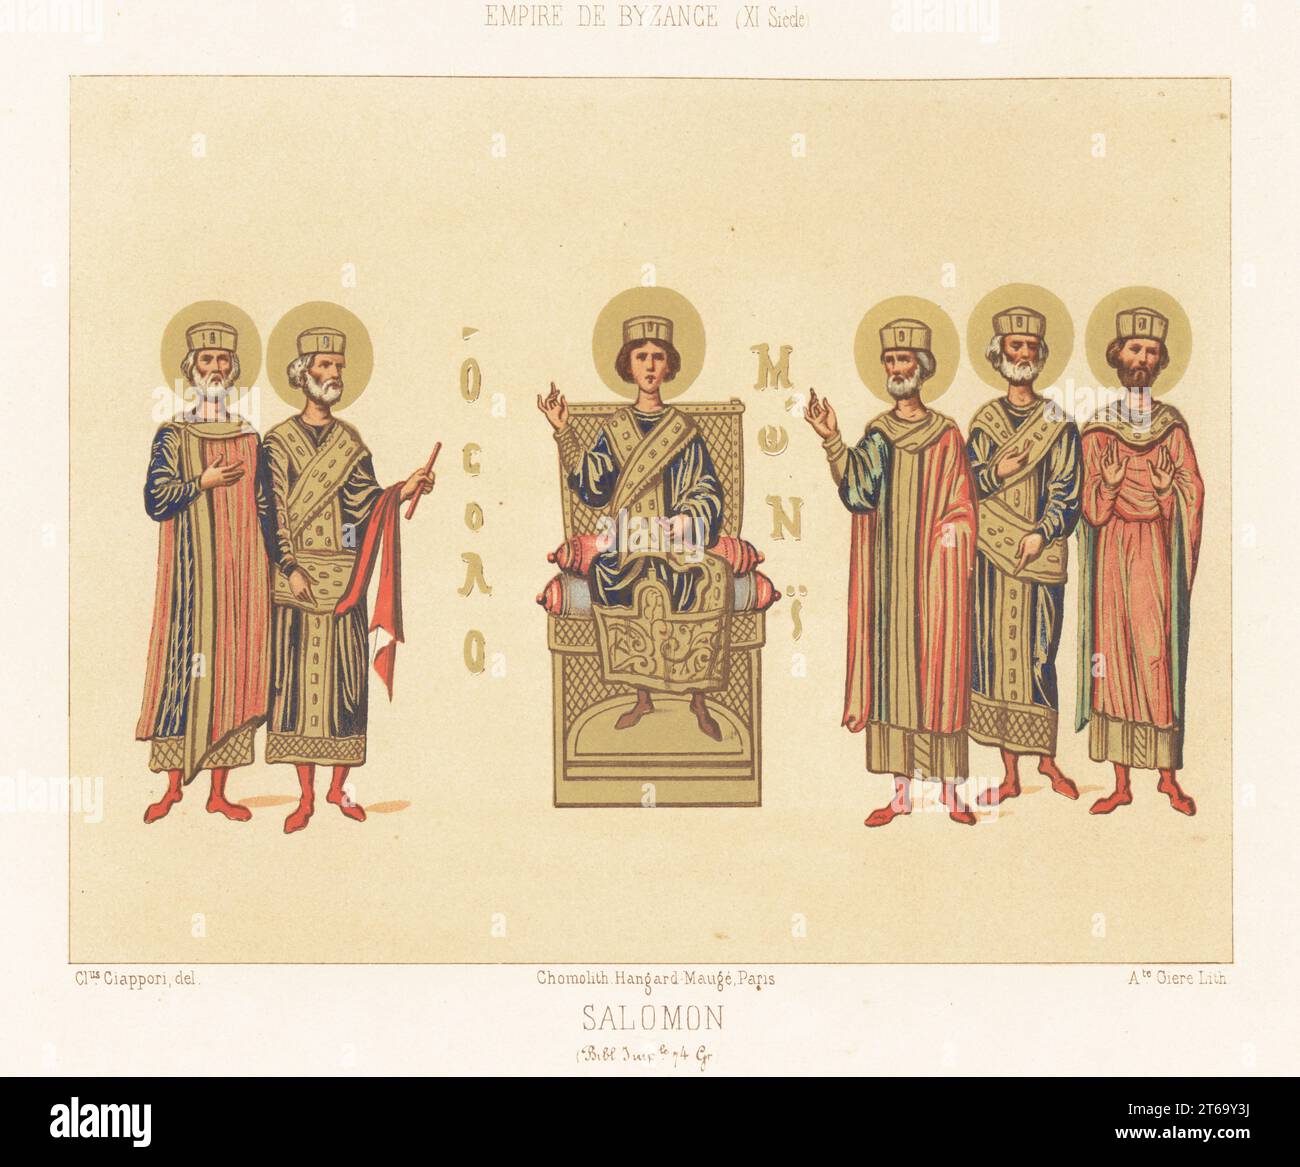 King Solomon on his throne with advisors in Byzantine costume, 11th century. The young prince and bearded old sages with gold bands on their shoulders. From a manuscript Gospels, MS 74 G, Bibliotheque Imperiale. Salomon, Empire de Byzance, XIe siecle. Chromolithograph by Giare after an illustration by Claudius Joseph Ciappori from Charles Louandres Les Arts Somptuaires, The Sumptuary Arts, Hangard-Mauge, Paris, 1858. Stock Photo